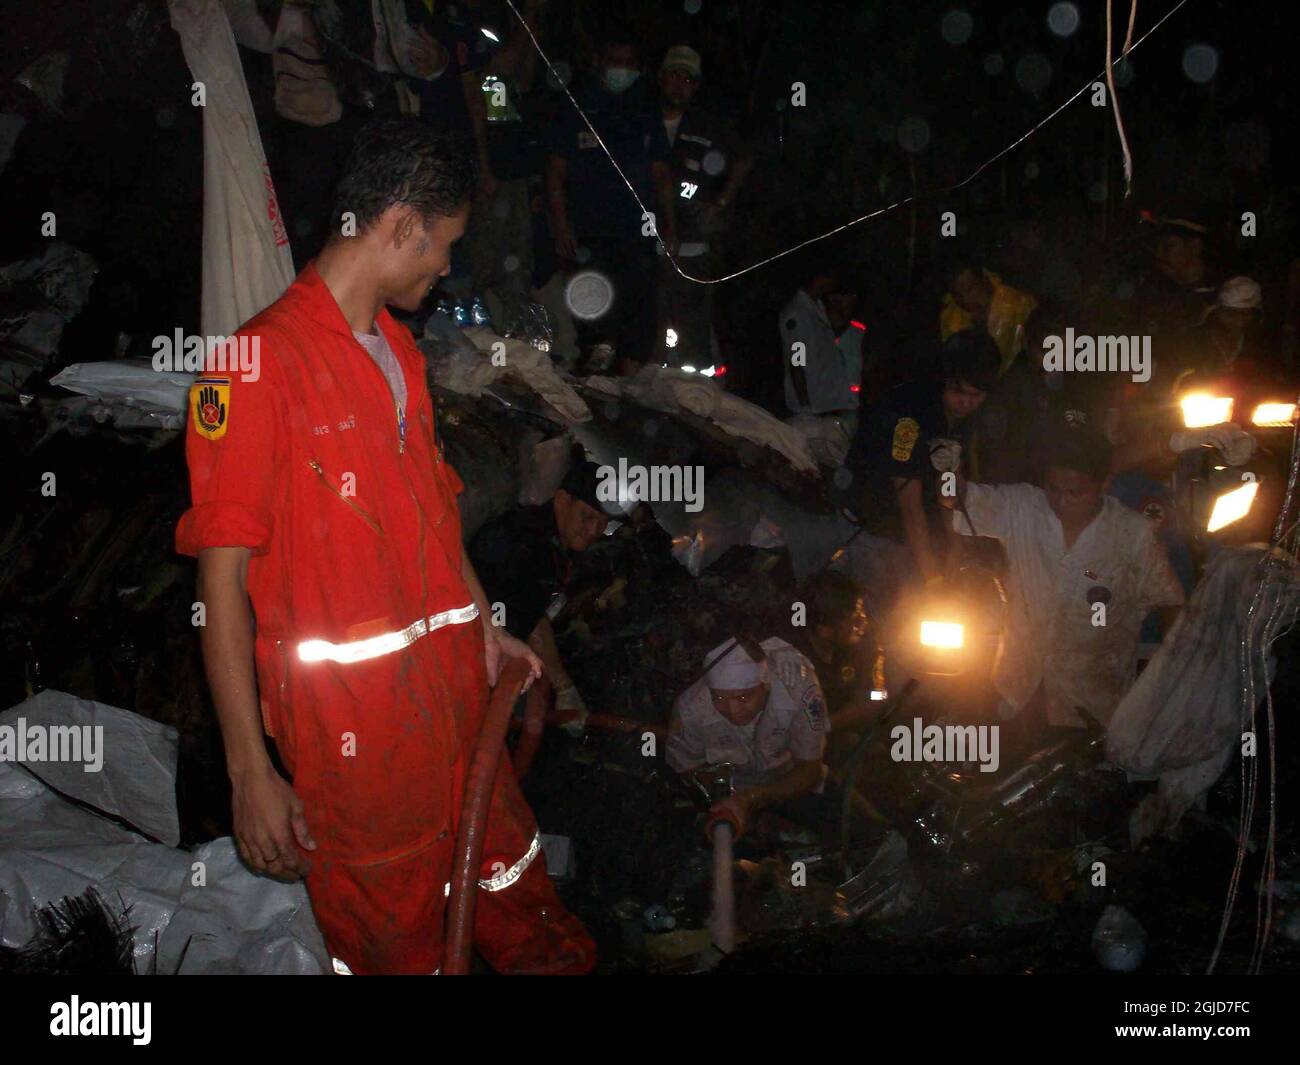 Rescue workers inside  the crashed flight OG269 at the Phuket airport in Thailand,  September 16, 2007. The passenger jet crashed at landing killing approximately 90 passengers. Stock Photo